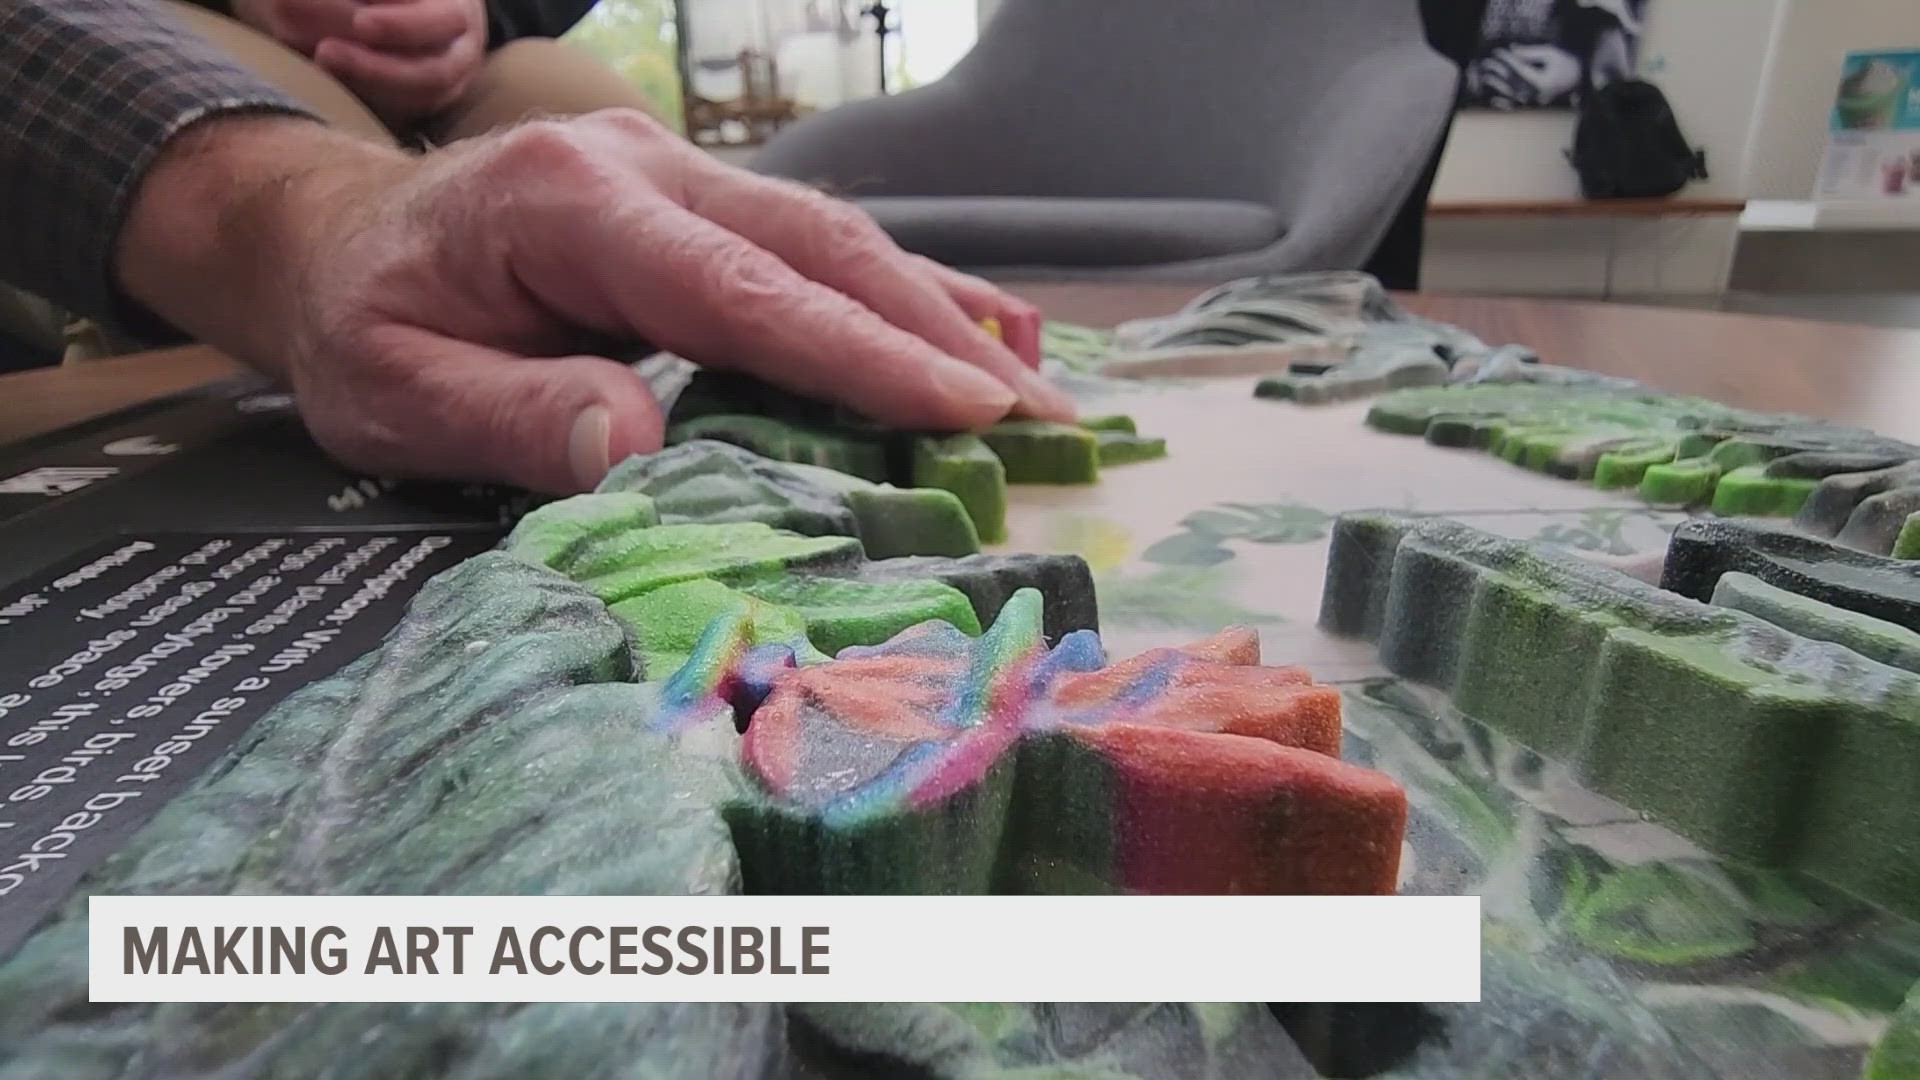 After 20 years of being a visual artist, Jill Wells knew she had to change to create a path to the arts for people of all abilities.